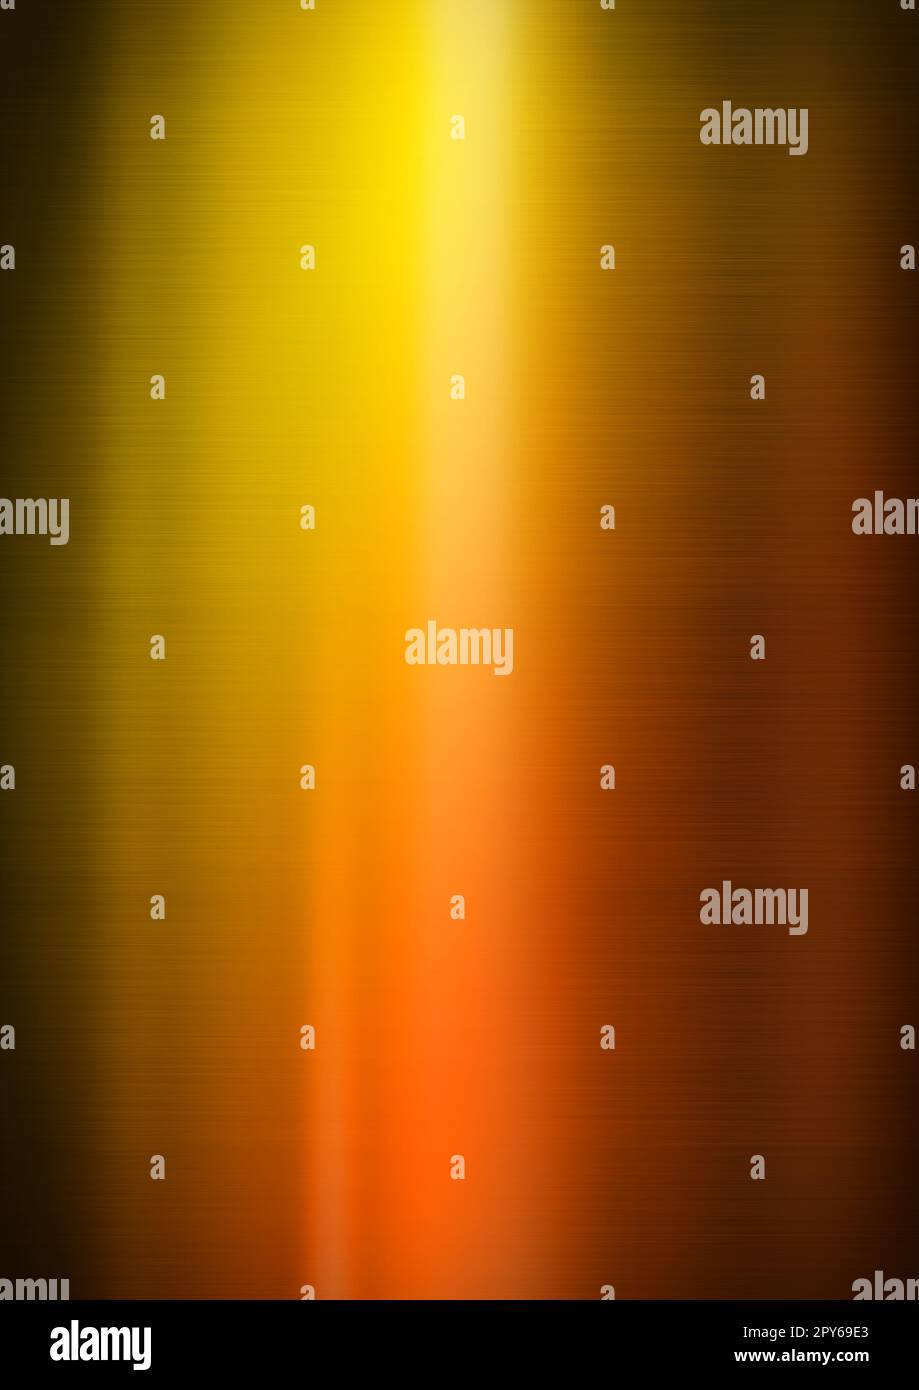 Colorful shiny brushed metal. Gradient from yellow to red. Vertical background texture Stock Photo